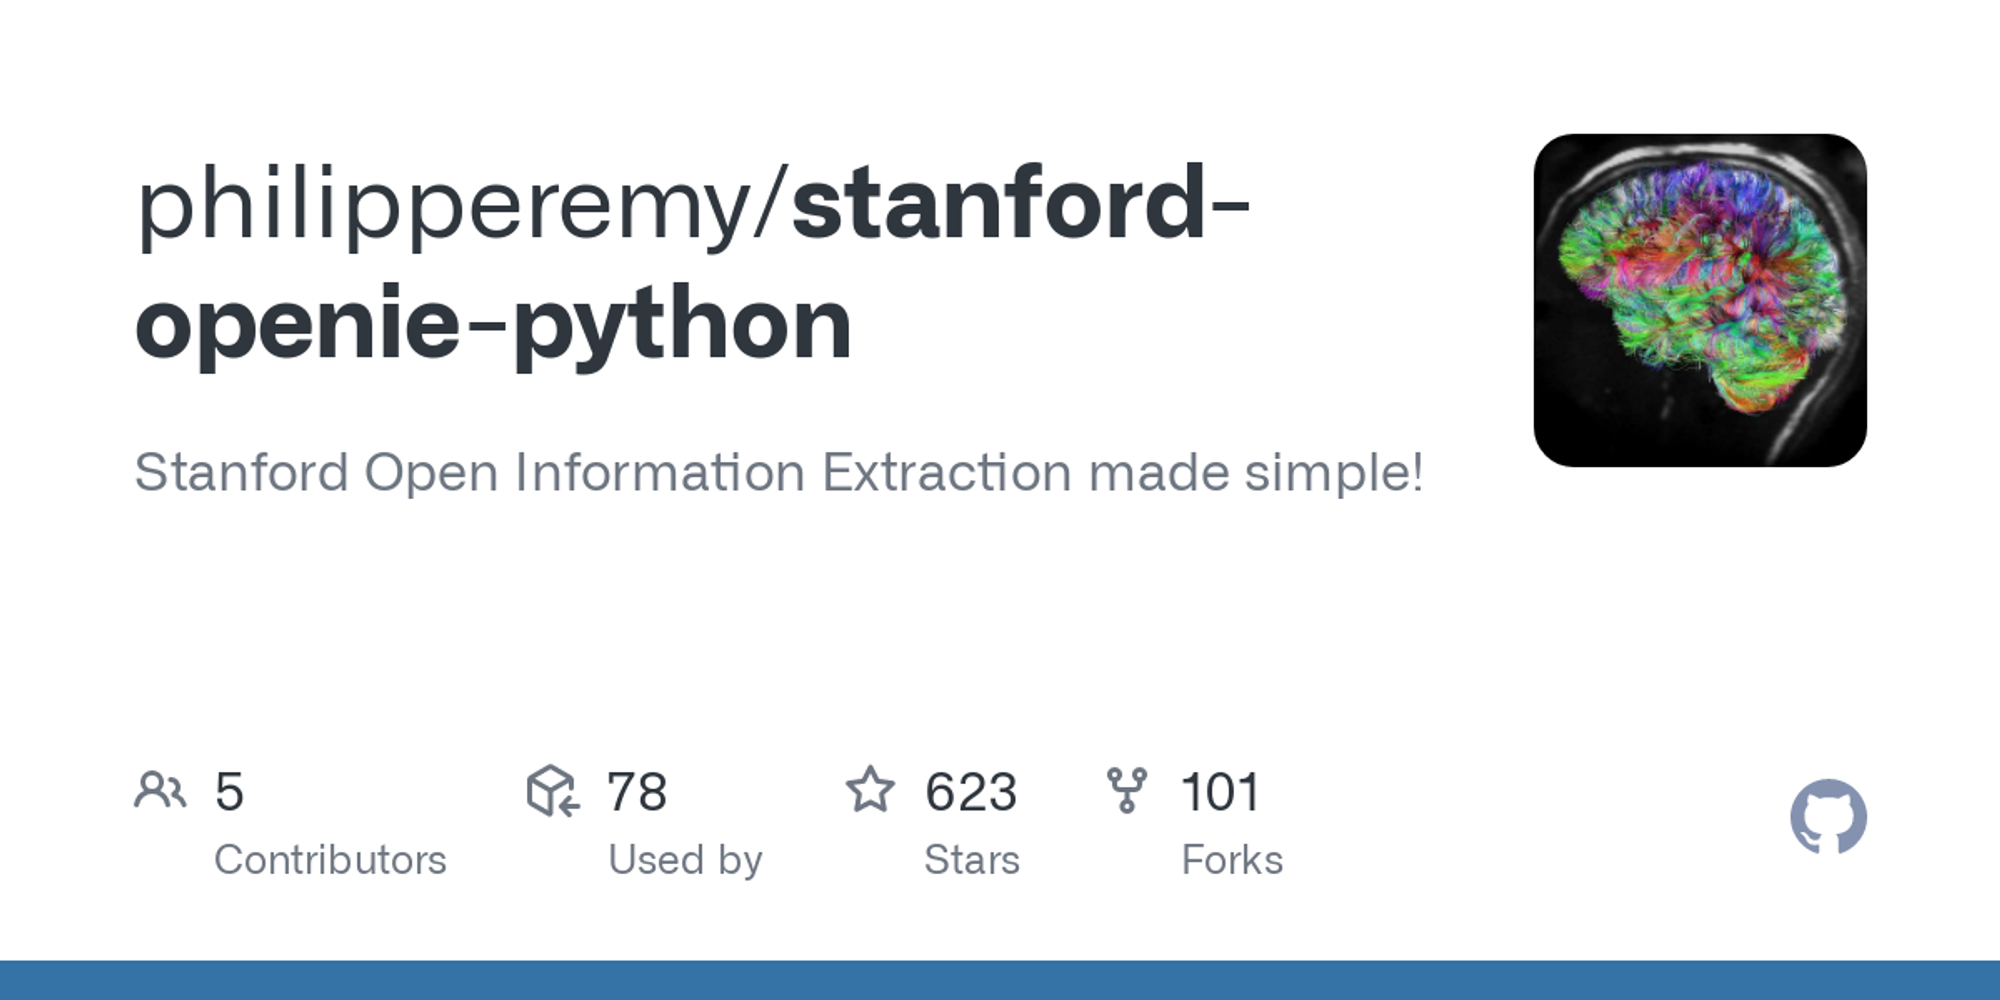 GitHub - philipperemy/stanford-openie-python: Stanford Open Information Extraction made simple!